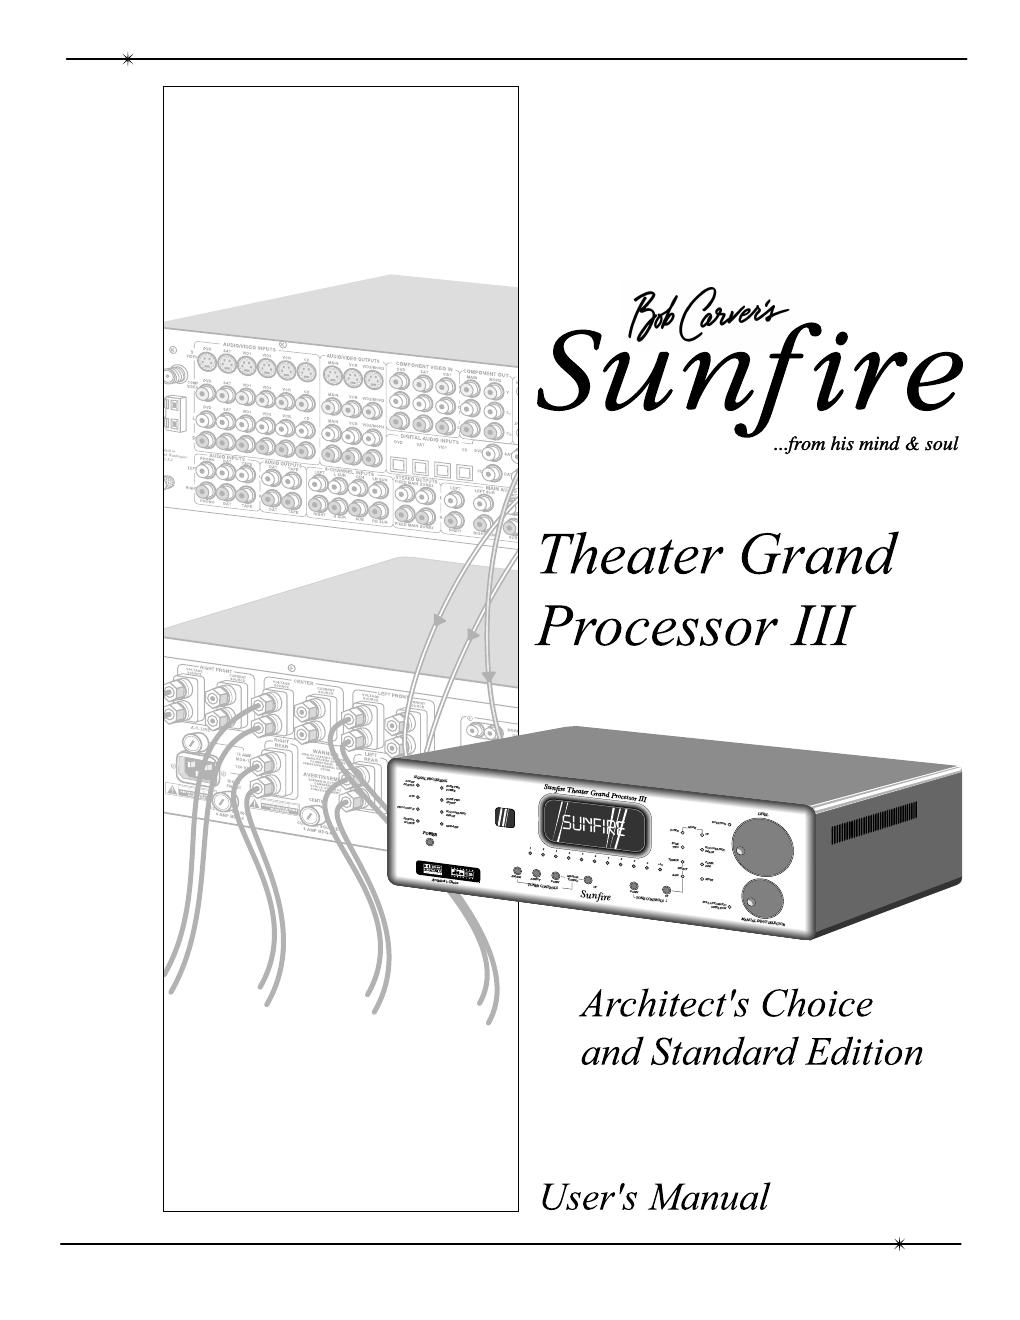 sunfire theater grand processor 3 owners manual